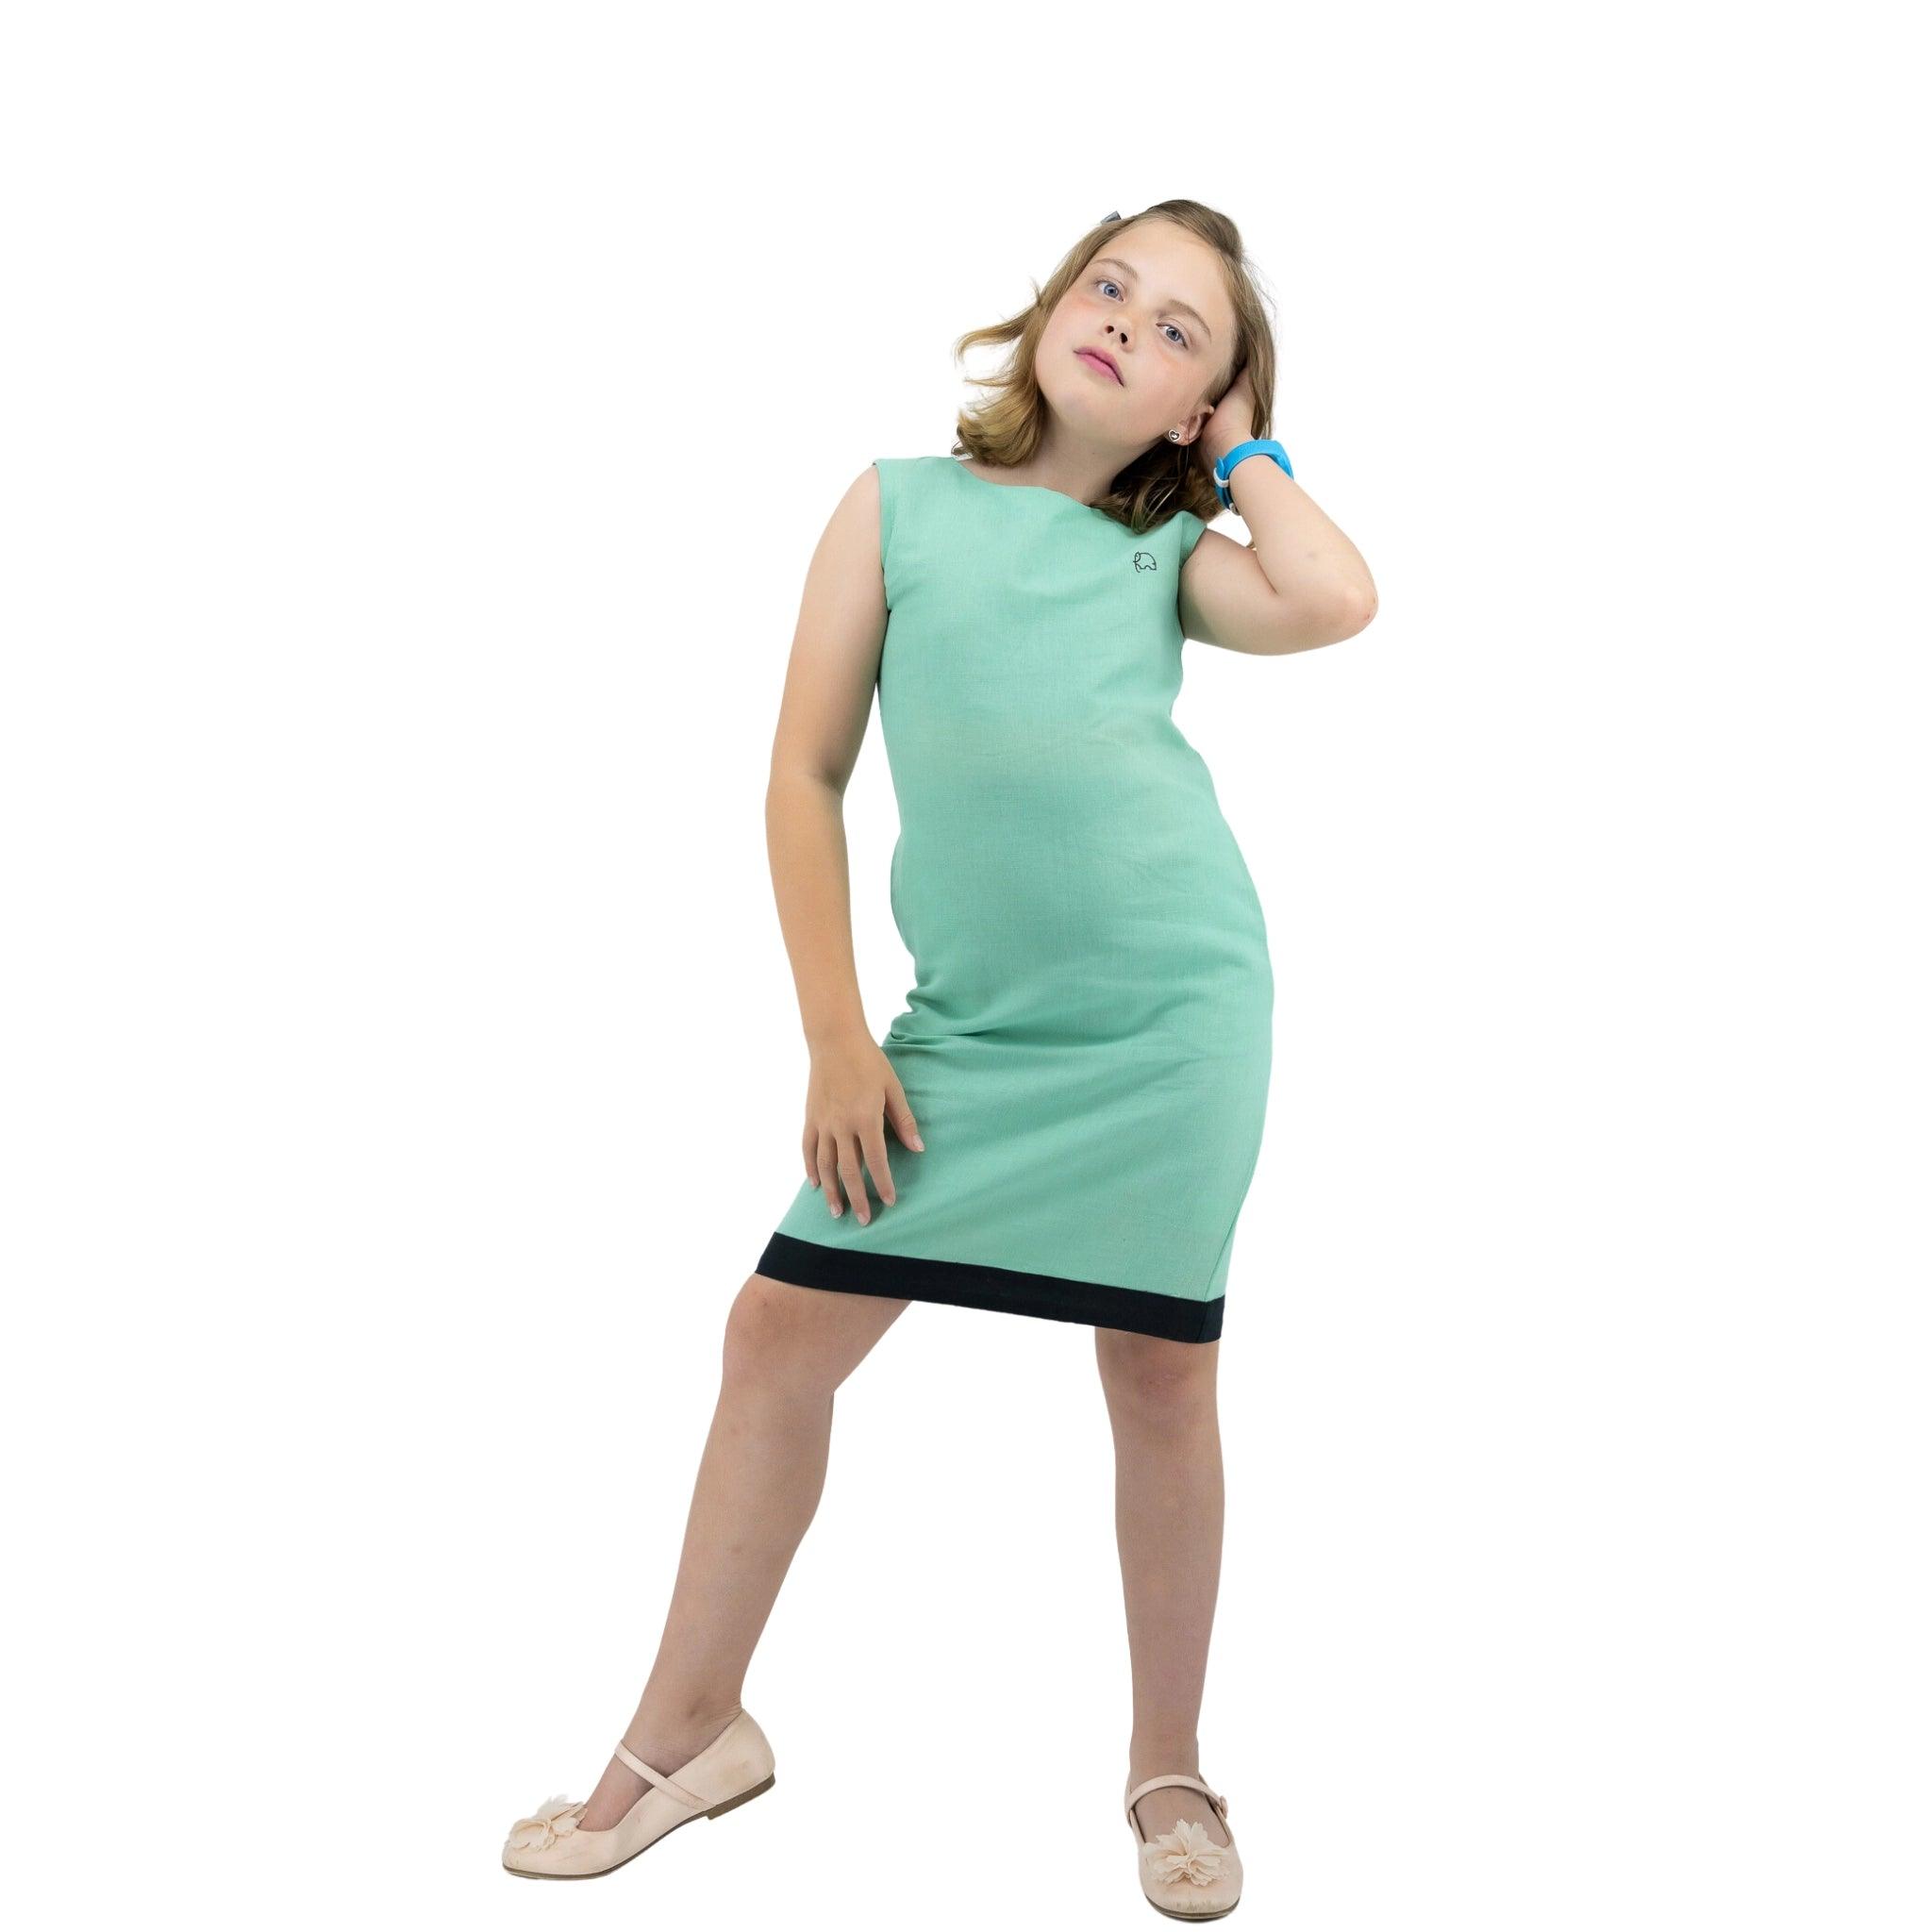 A young girl in a Karee Linen Cotton Round Neck Frock for Kids in Neptune Green posing with one hand on her hip and the other behind her head, standing against a white background.